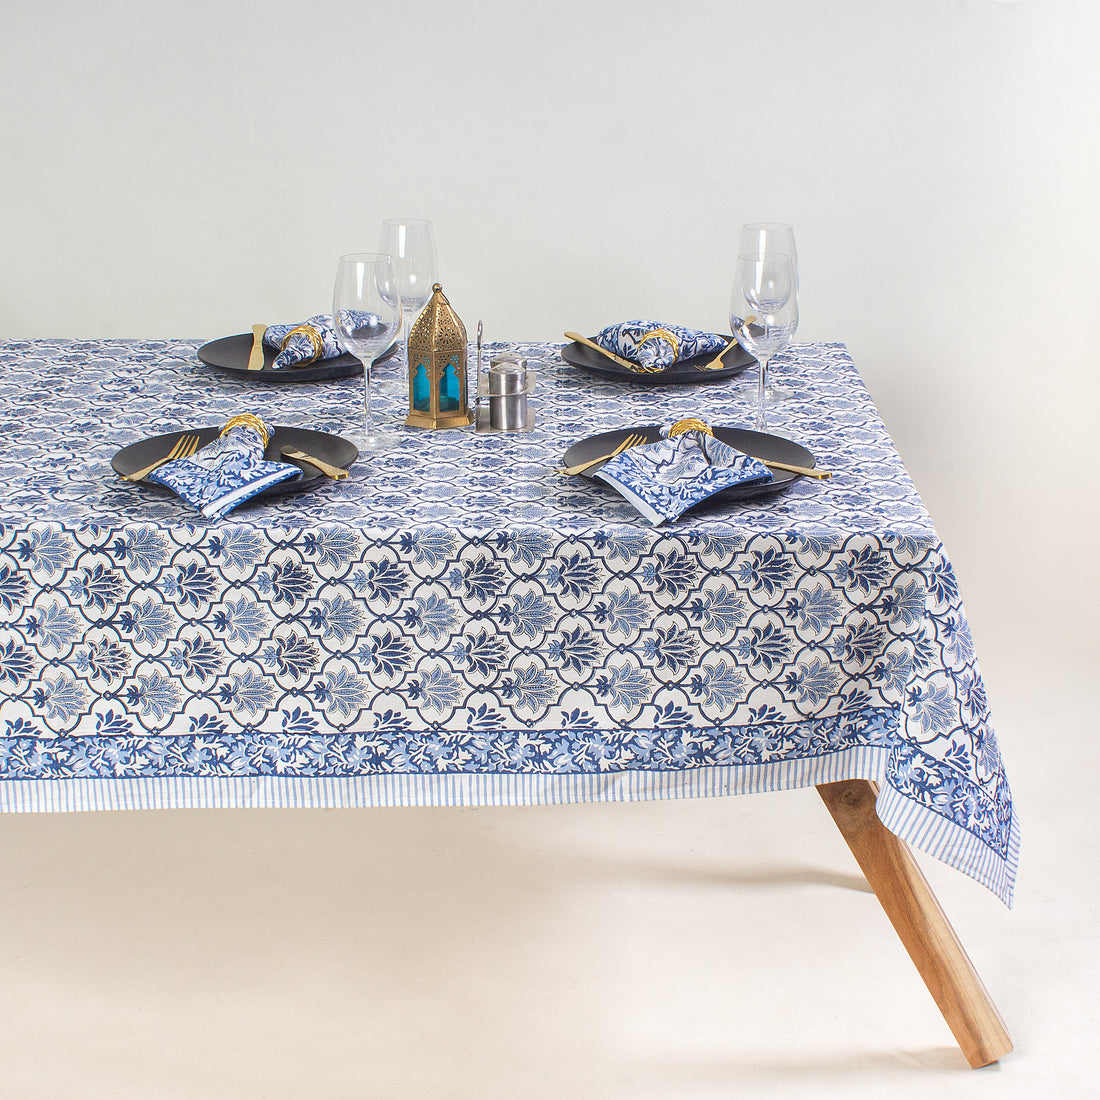 Dining Table Cover 6 Seater With Cotton Napkins Online